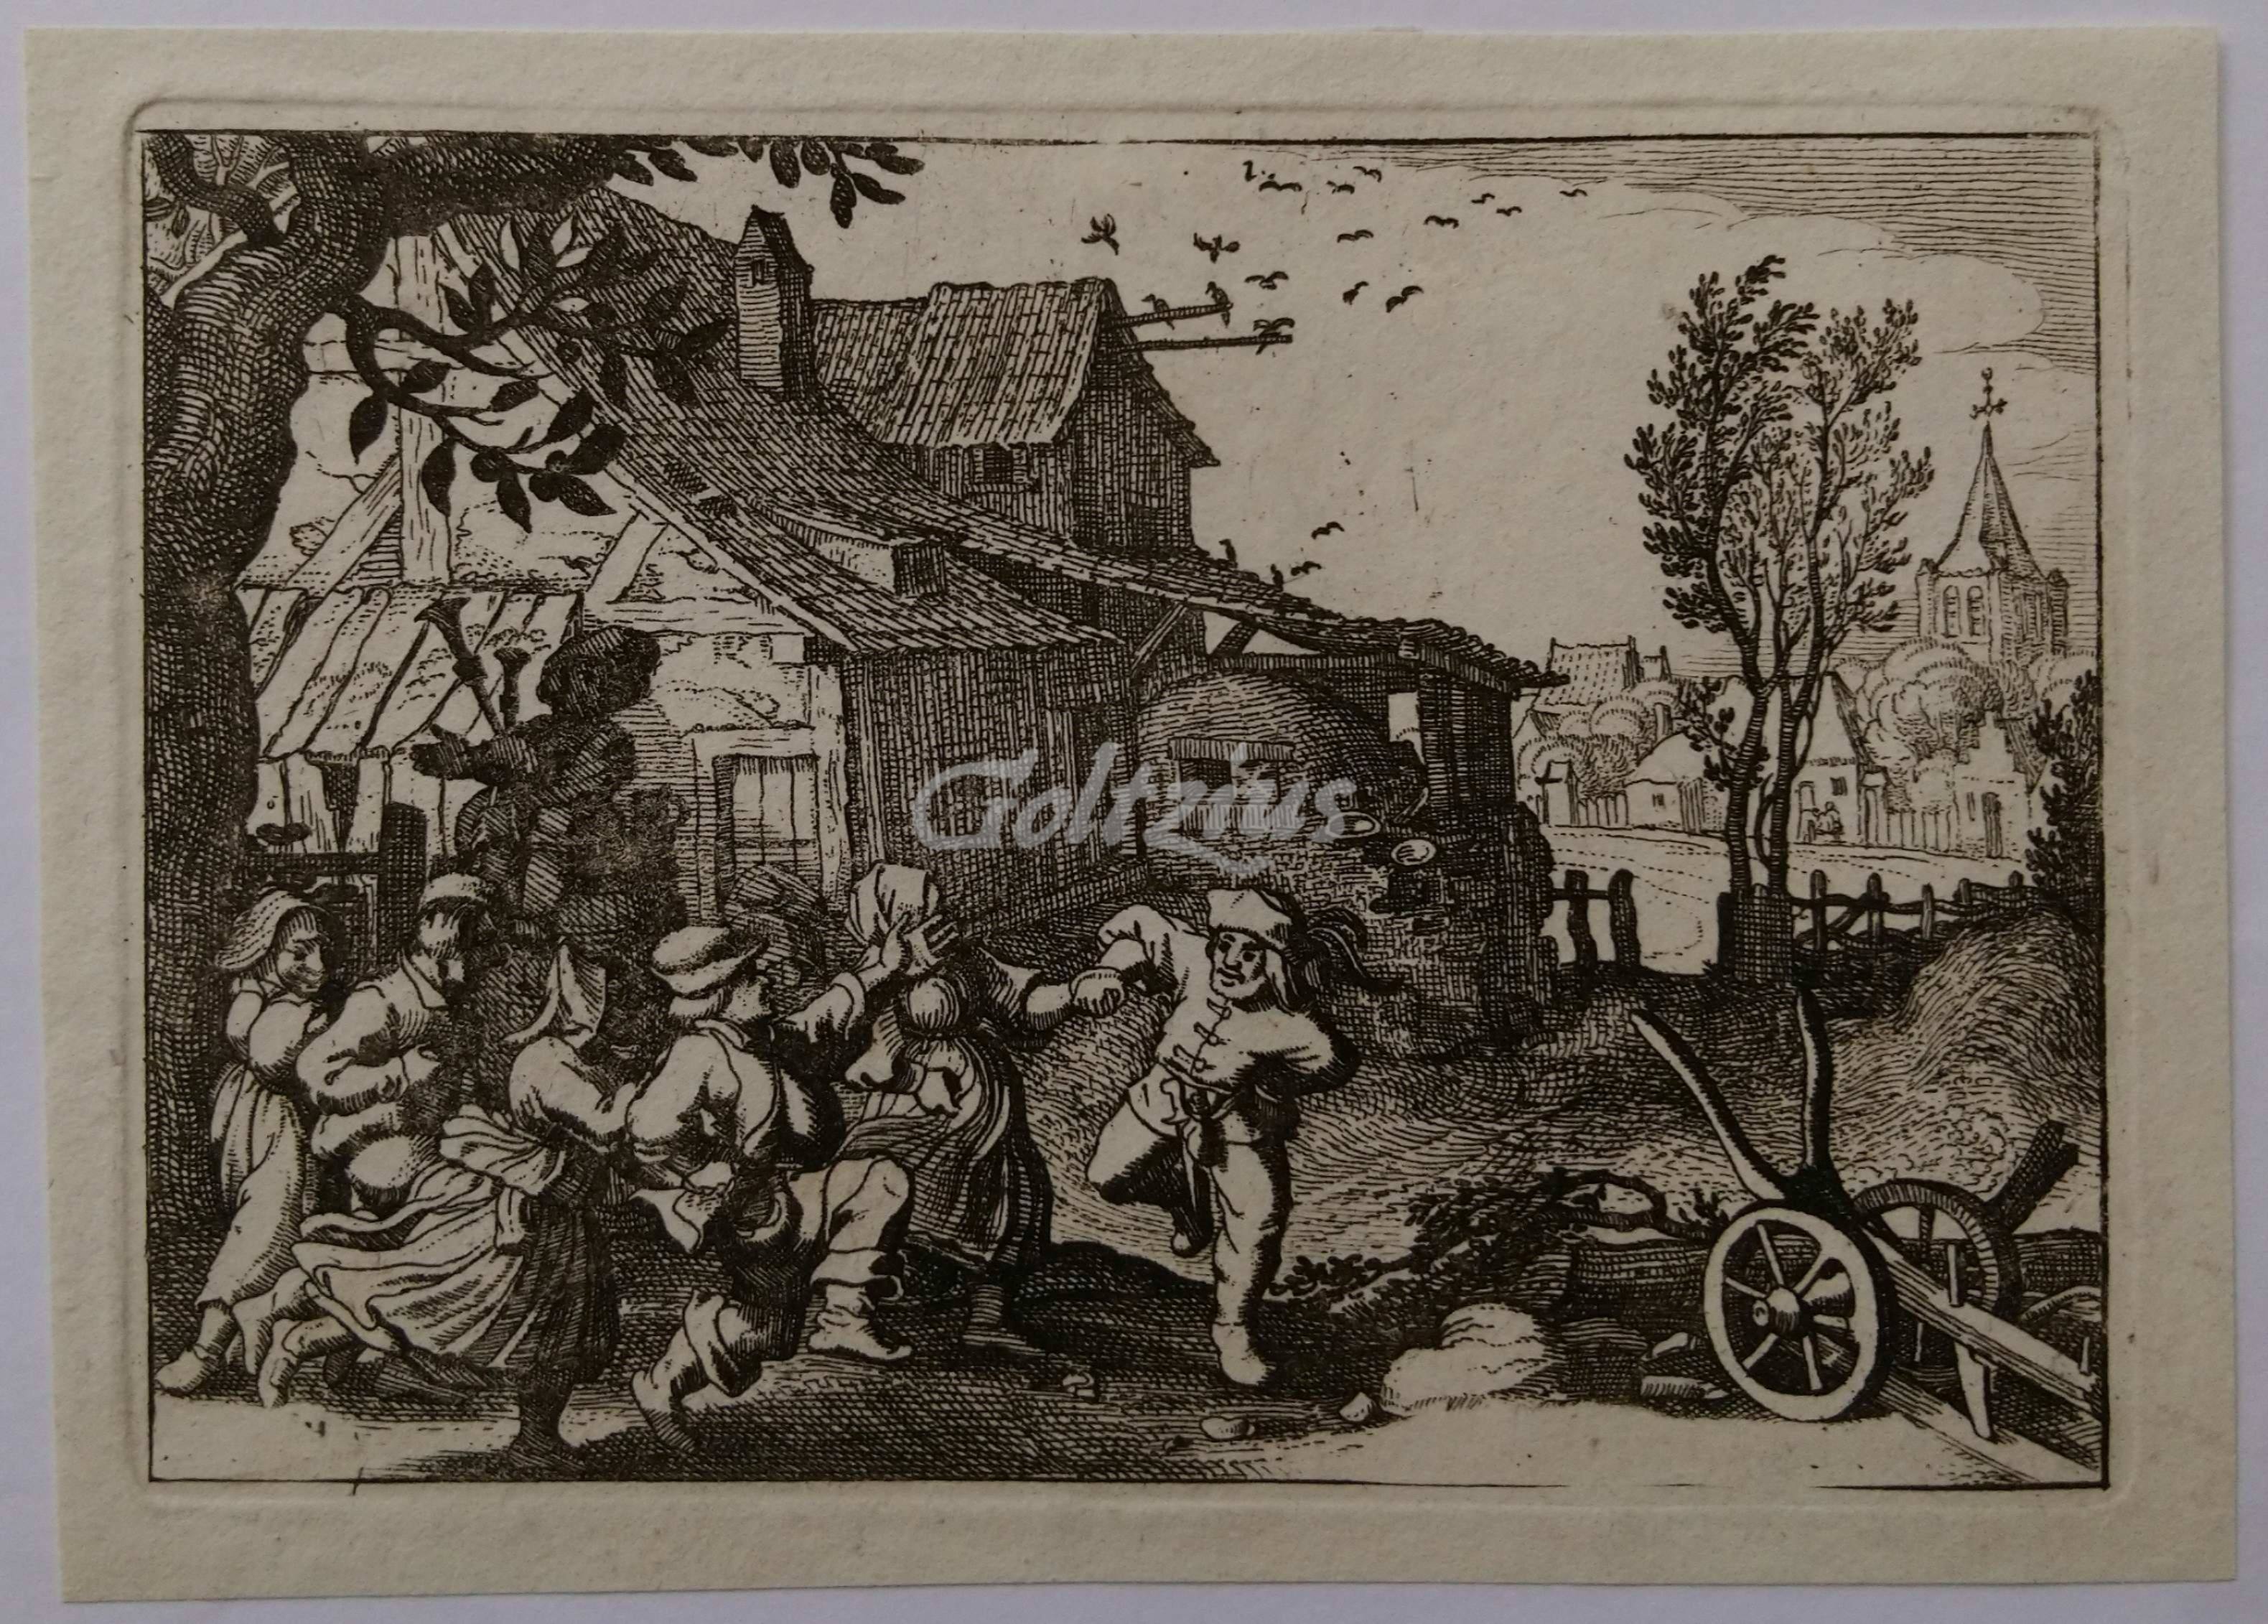 ANONYMOUS, Dancing peasants in a village